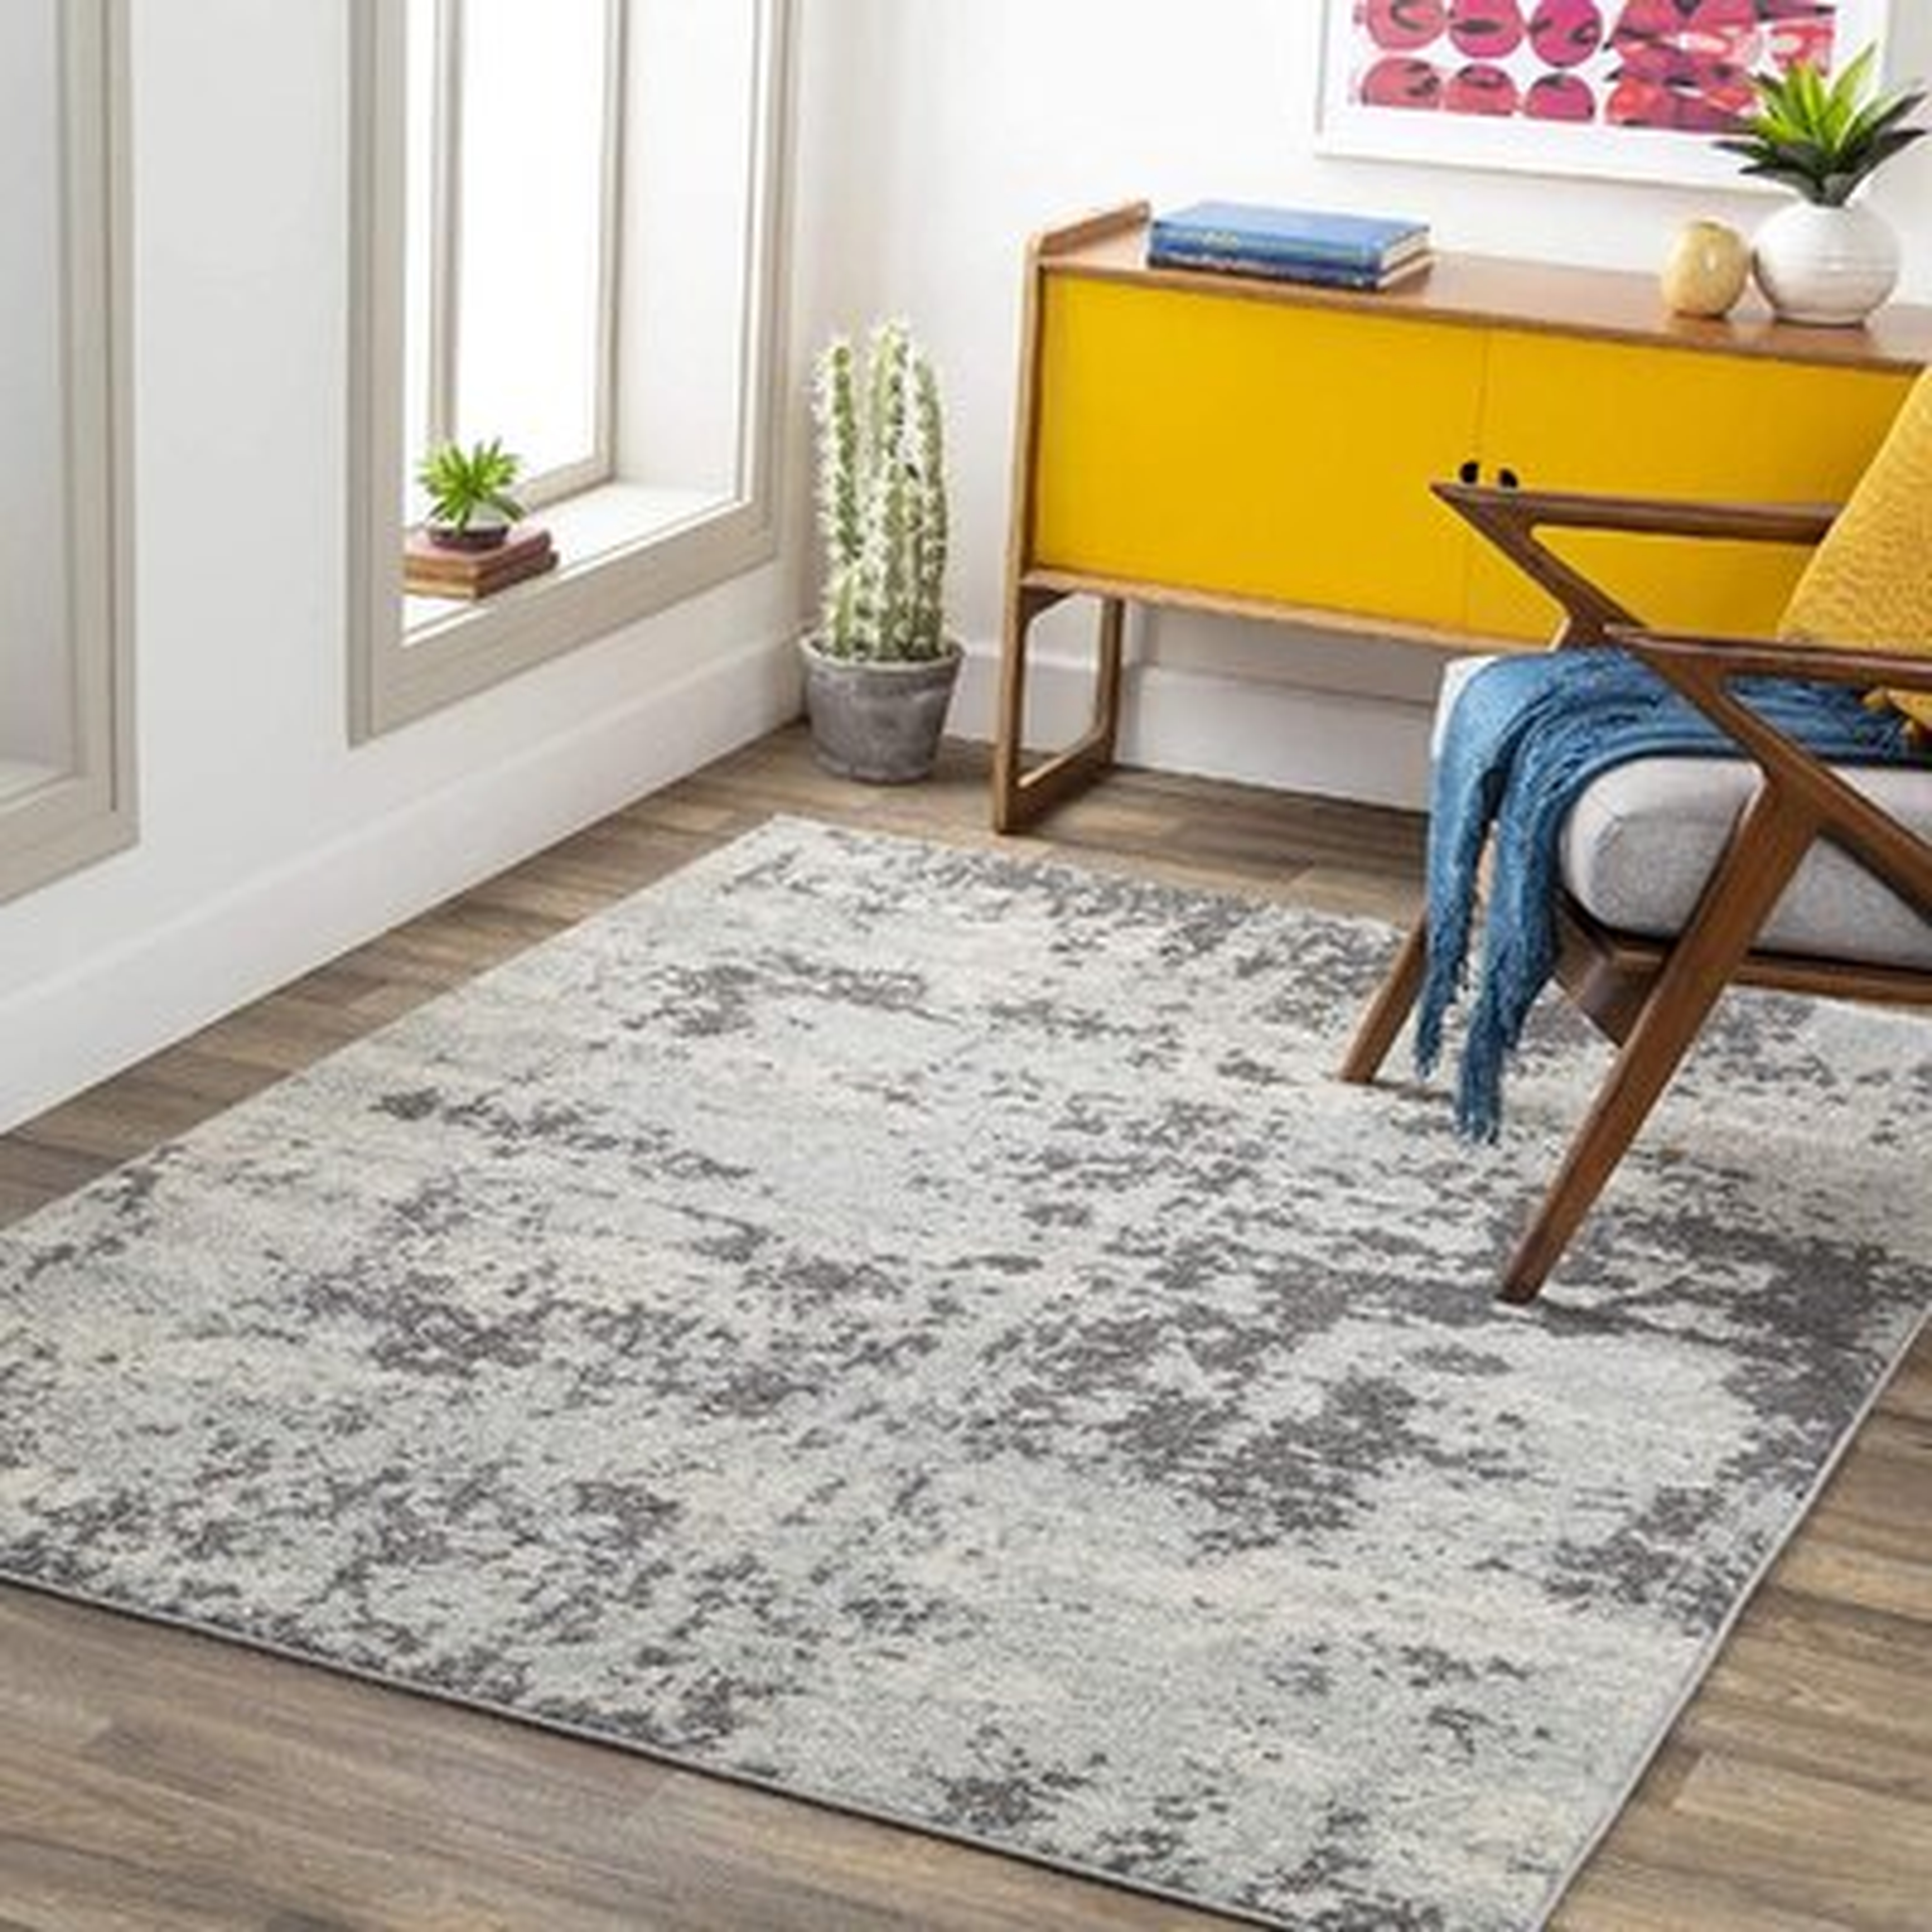 Arti Modern Abstract Area Rug,6 Ft 7 In X 9 Ft - Wayfair